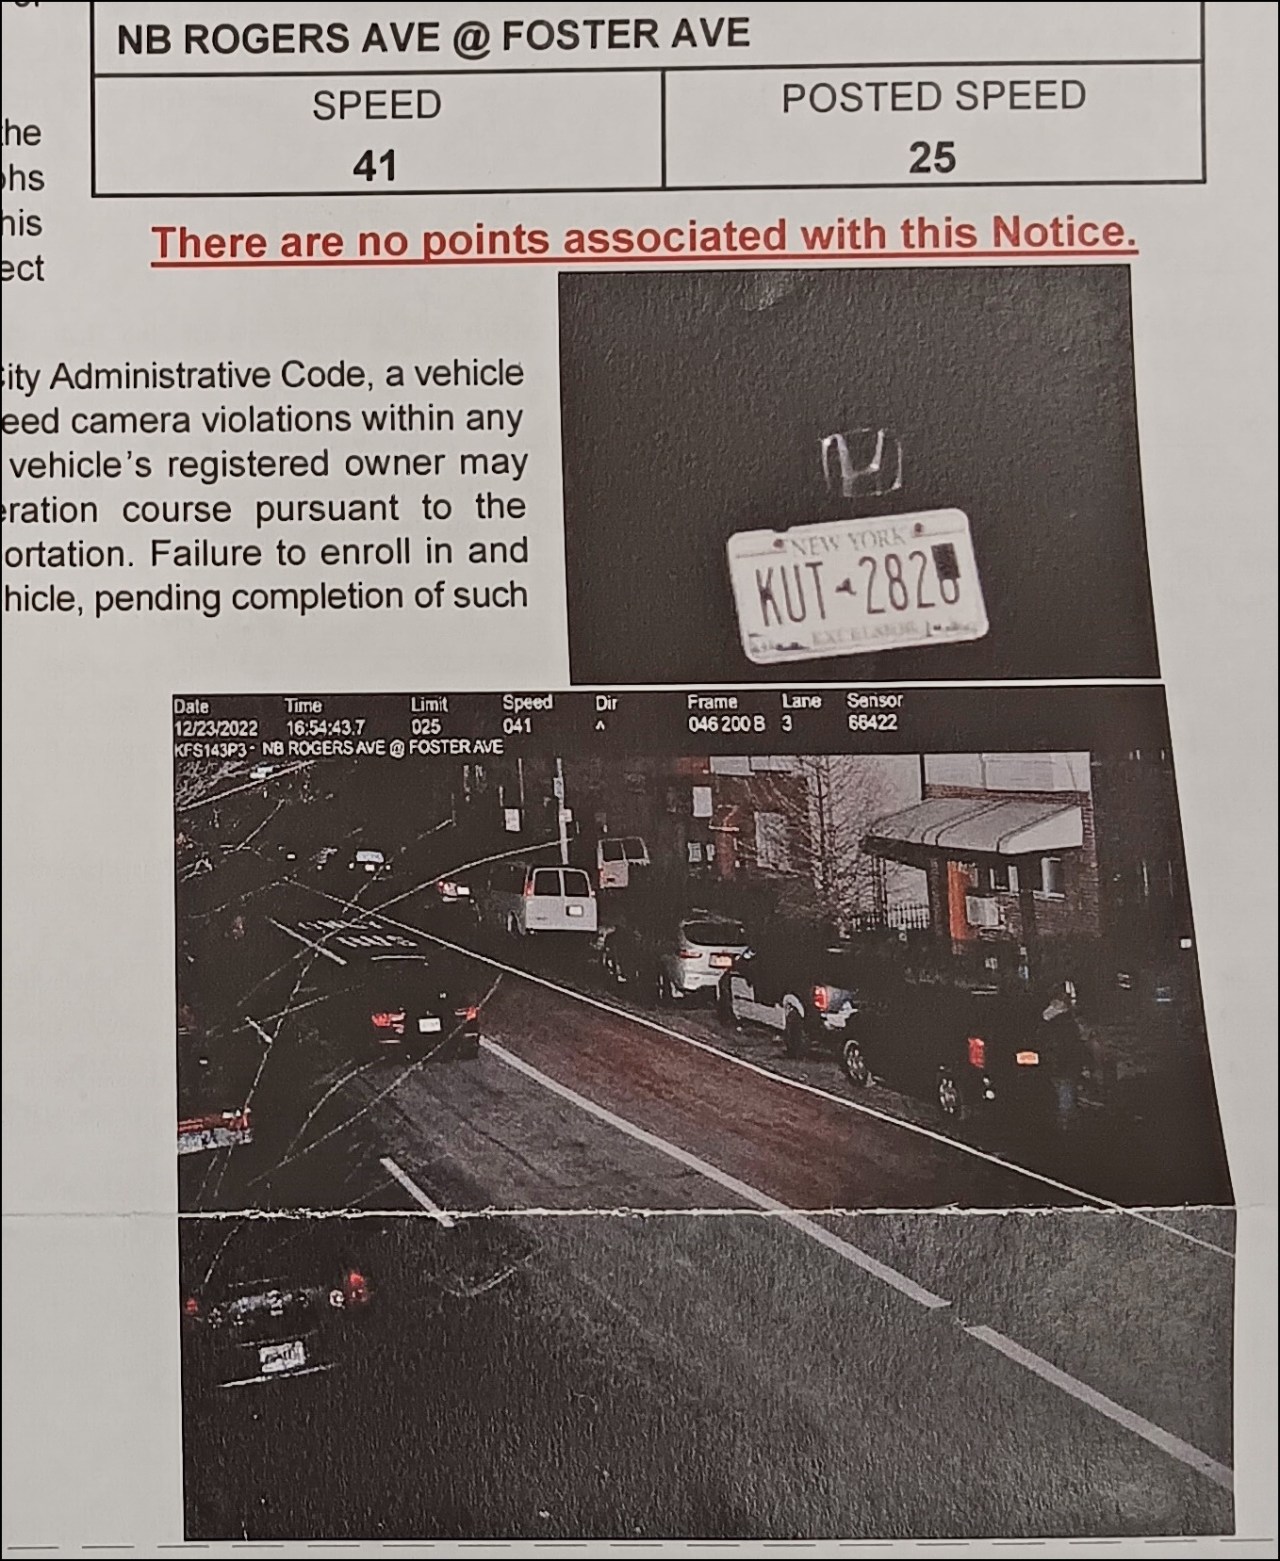 The summons shows a dark car with a defaced plate.